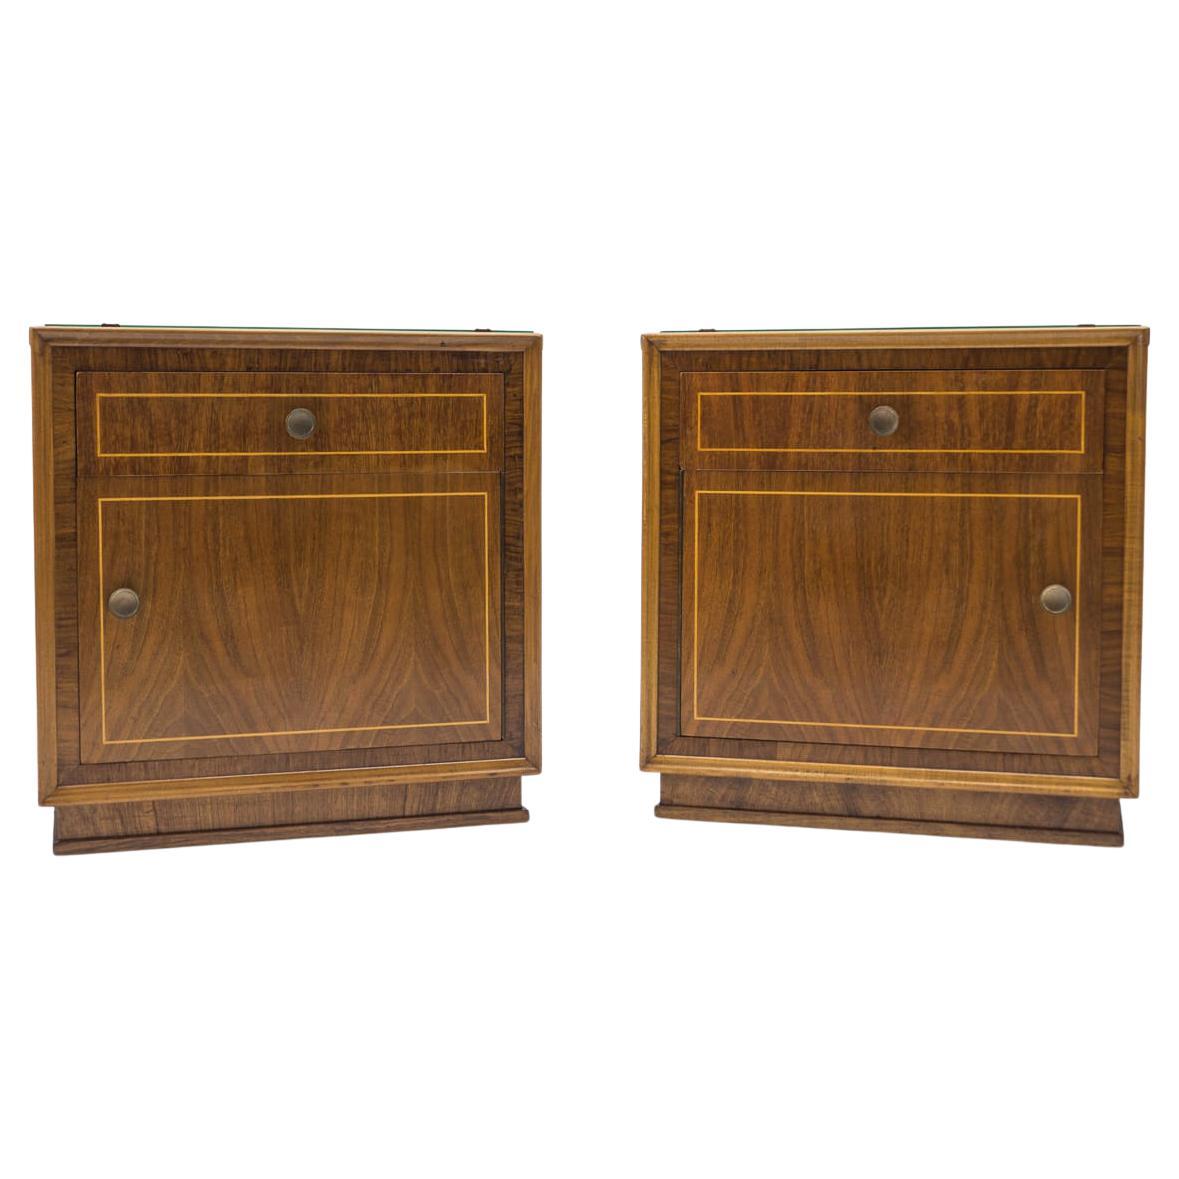 Lovely Austrian Art Deco Nightstands with Inlays, 1930s, Set of 2 For Sale